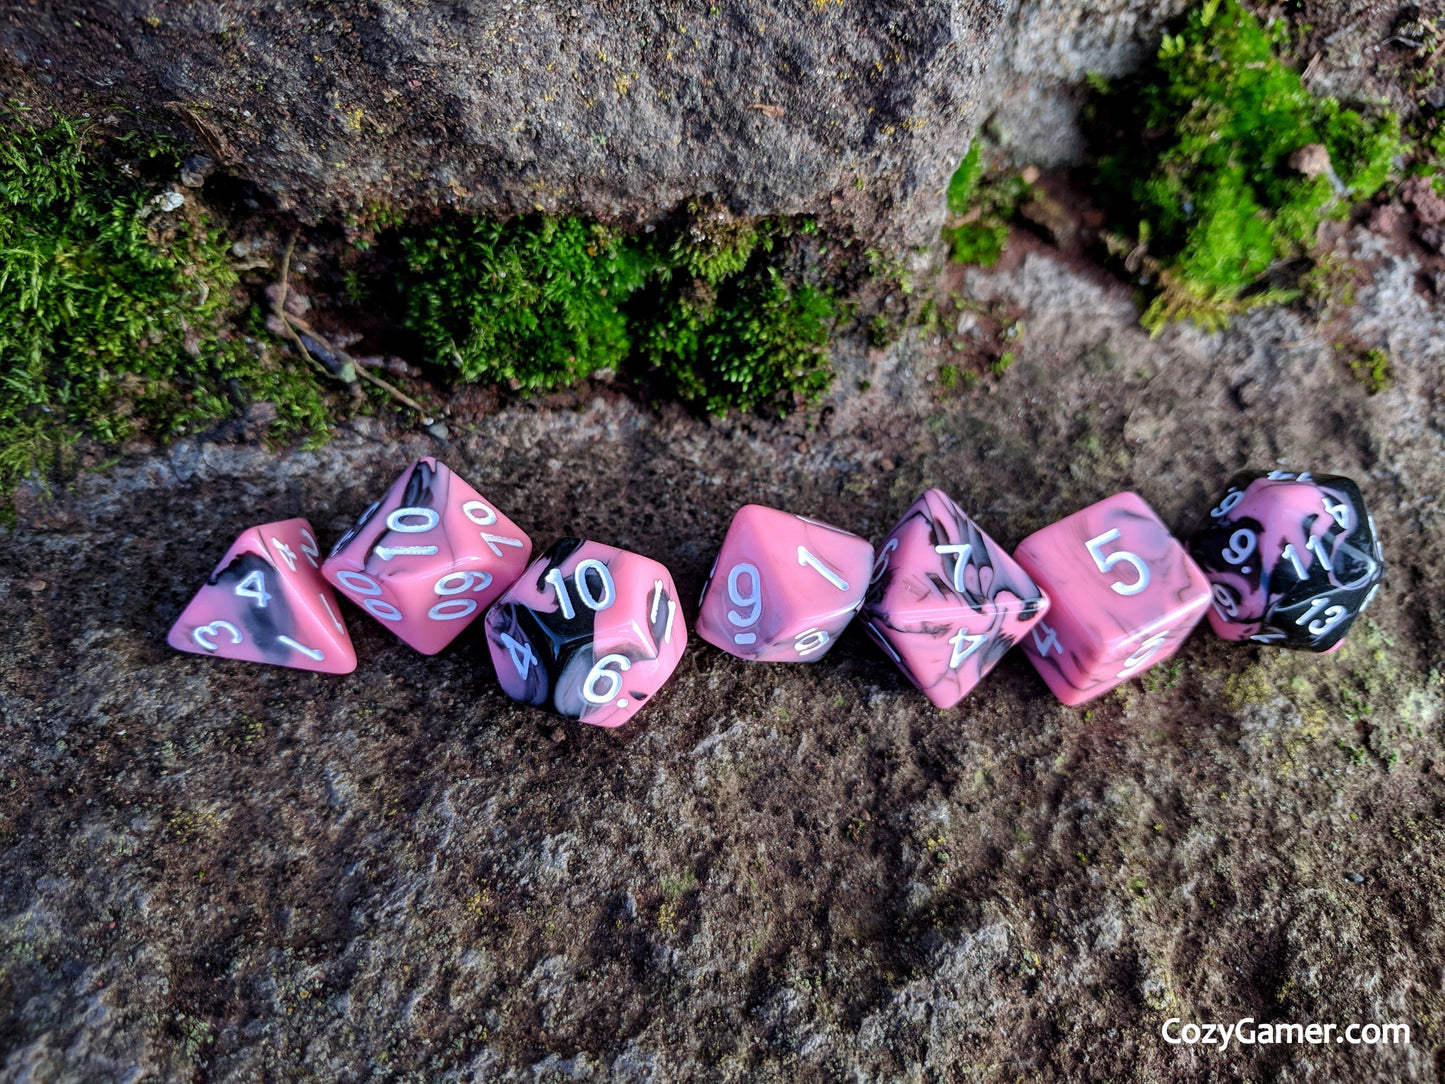 Bright Encounter DnD Dice Set, Black and Pink Marble Dice - CozyGamer